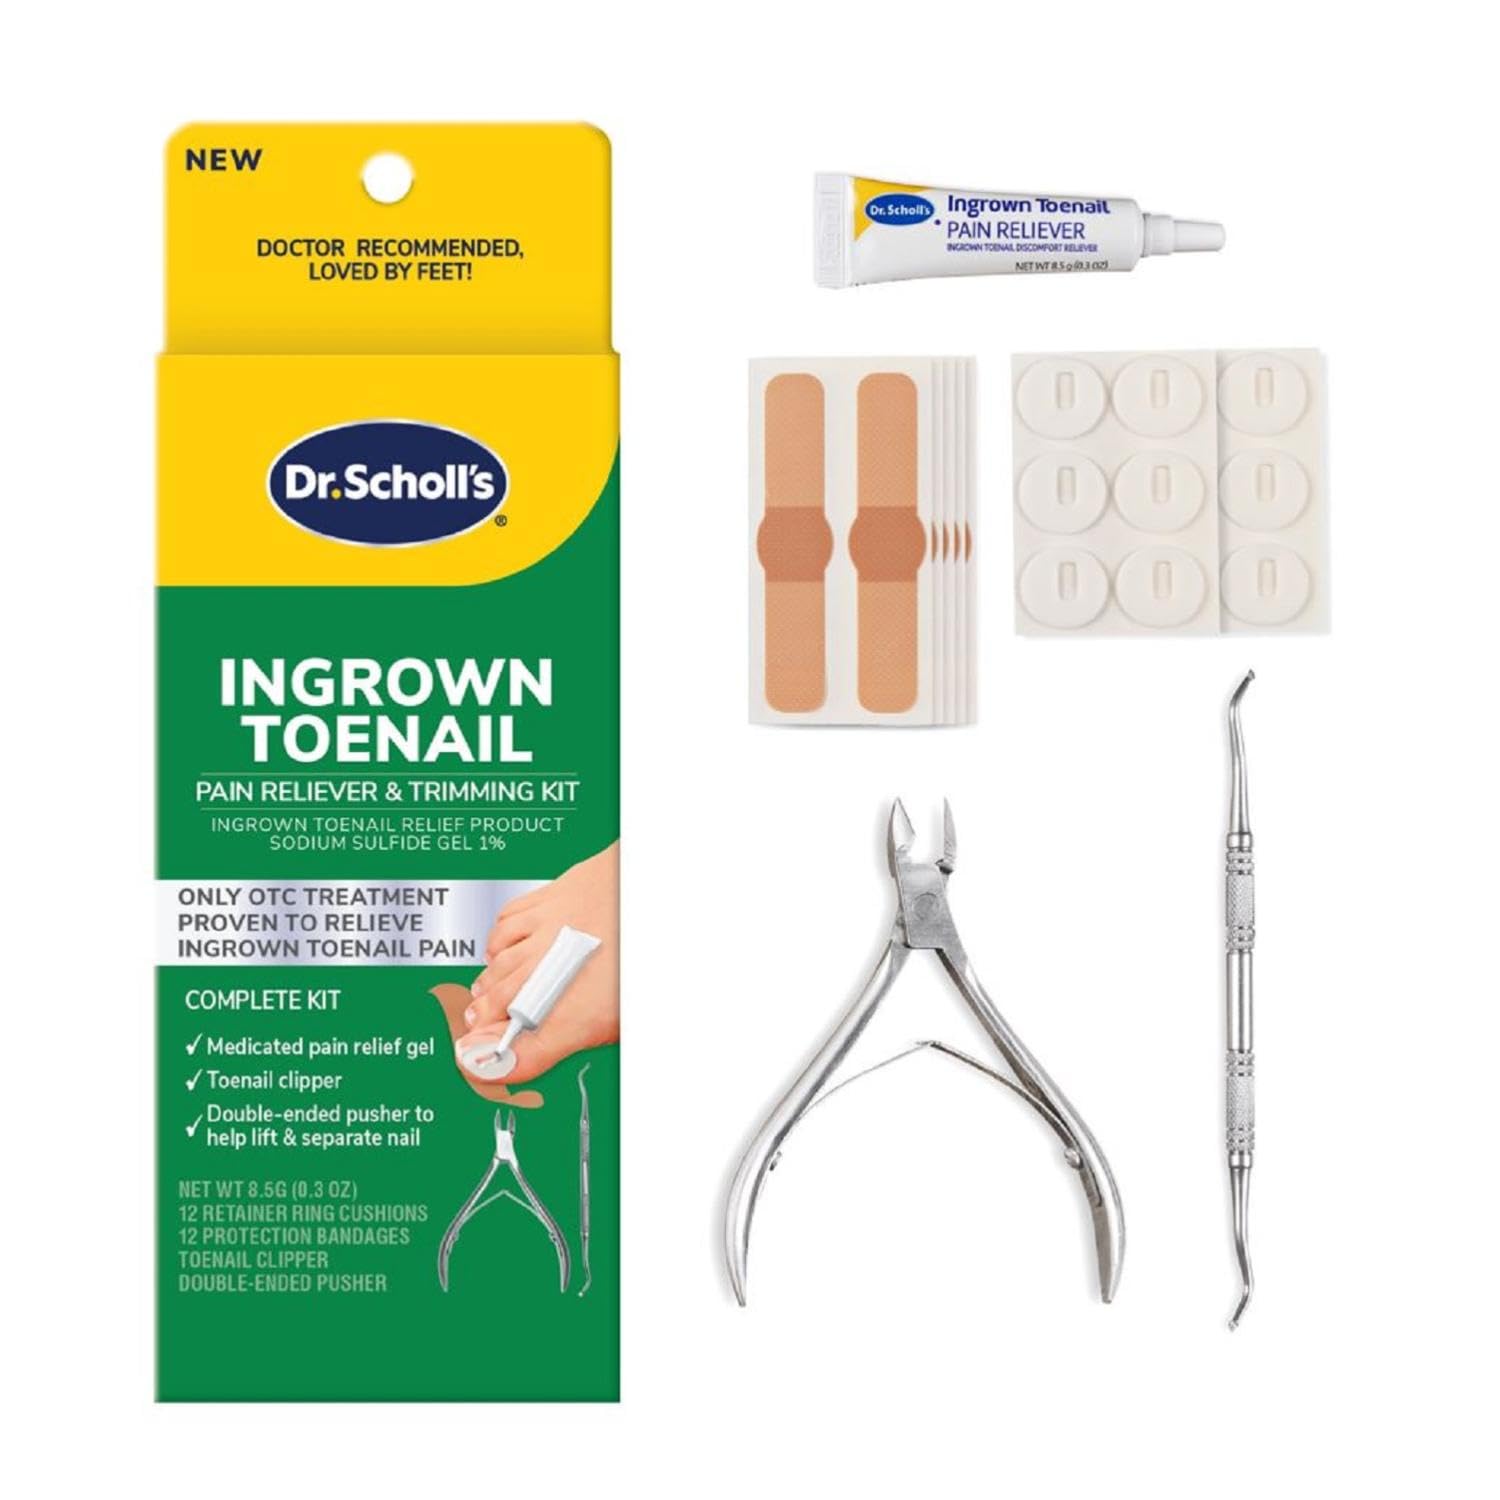 Dr. Scholl's INGROWN TOENAIL PAIN RELIEVER & TRIMMING KIT, 0.3 oz // Only OTC Treatment Proven to Relieve Ingrown Toenail Pain - Includes Medicated Gel + Foam Rings + Bandages + Clipper & Pusher Tools